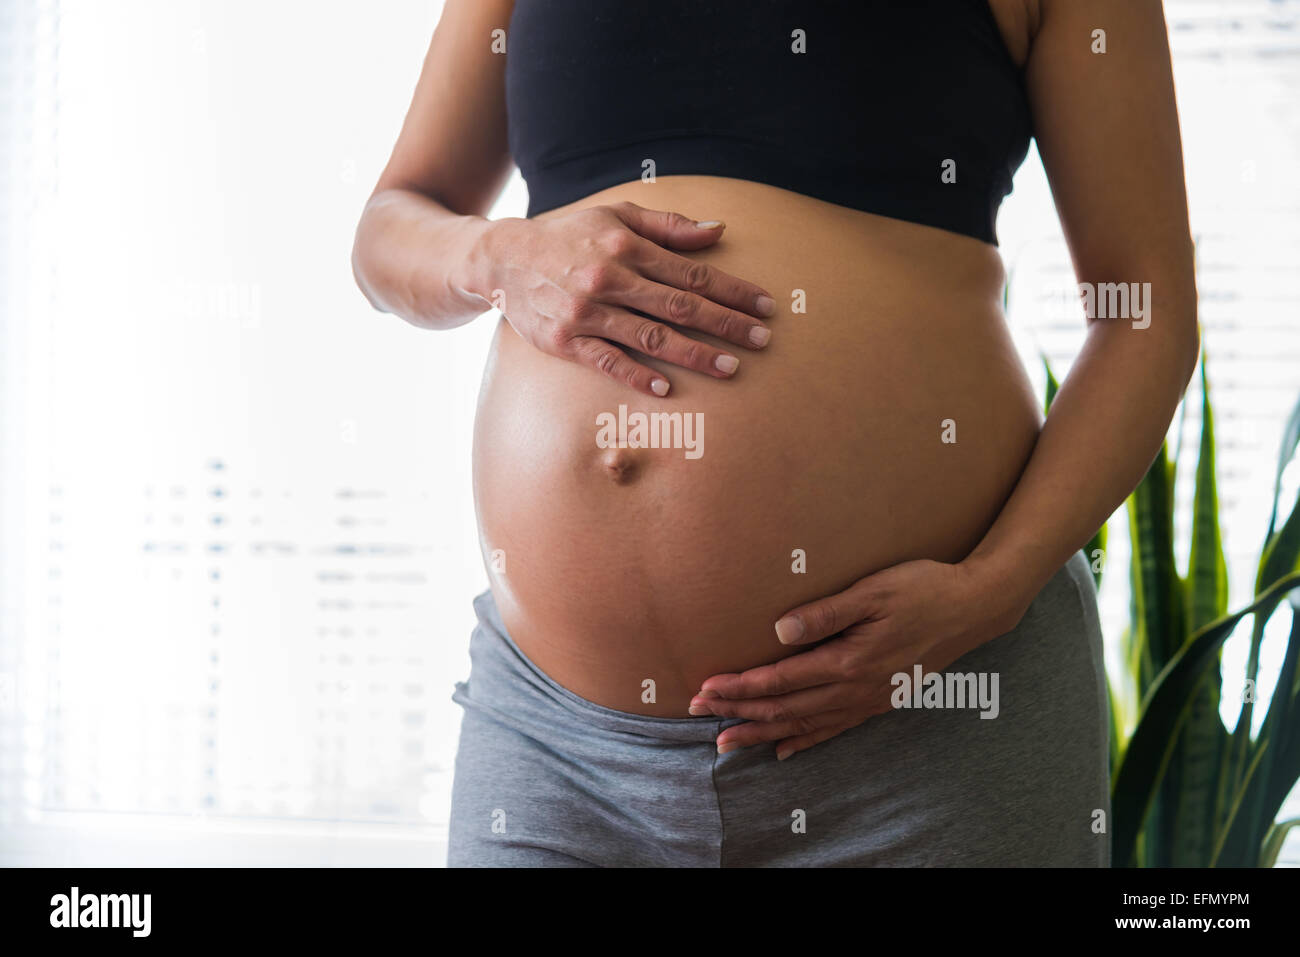 Baby bump, Image of 8 month pregnant woman holding her bump Stock Photo